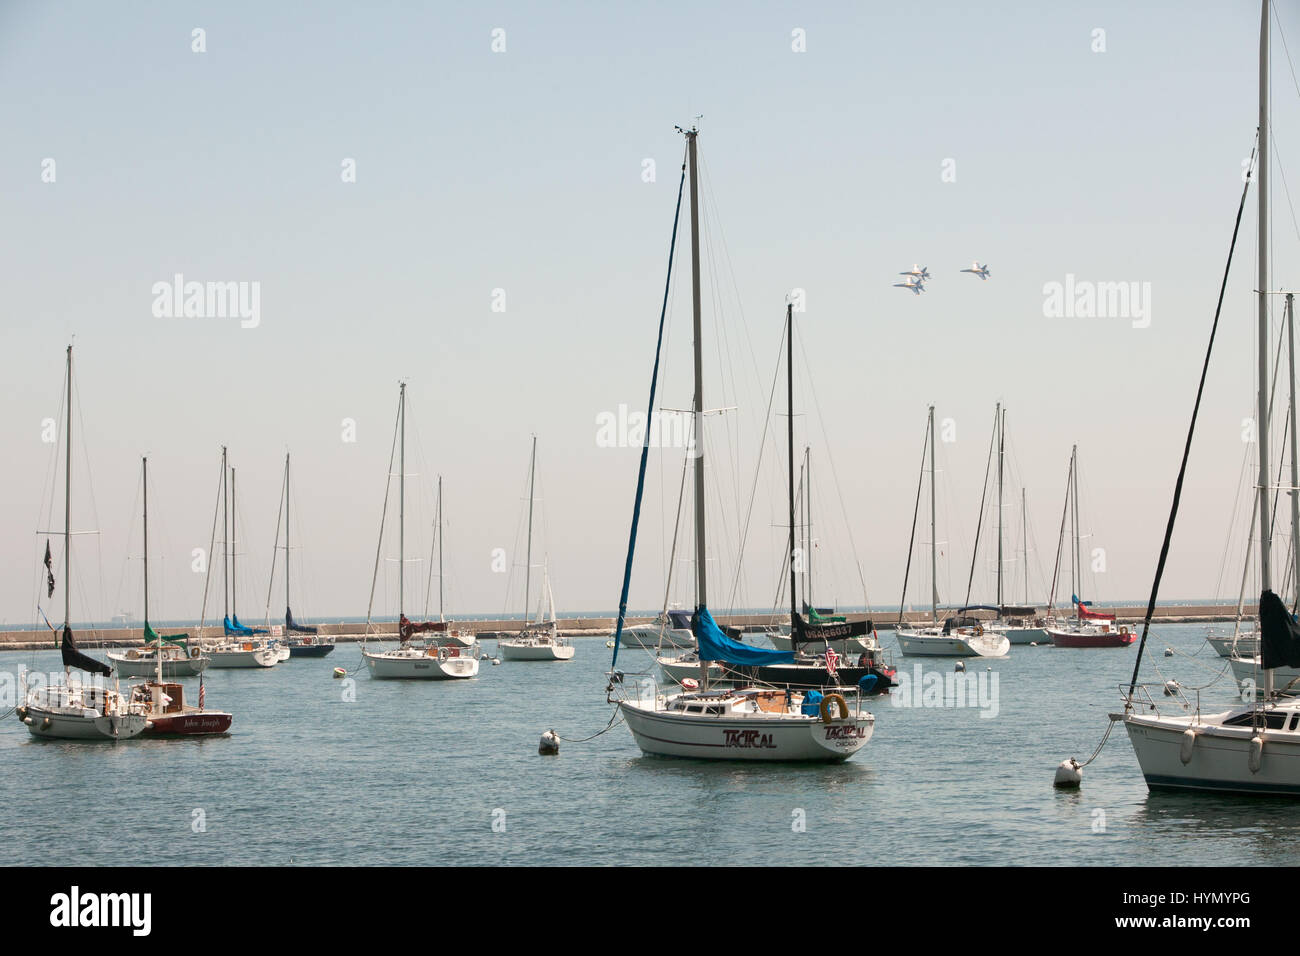 The Blue Angels fly in formation above Lake Michigan and sailboats docked in Chicago Harbors. Stock Photo